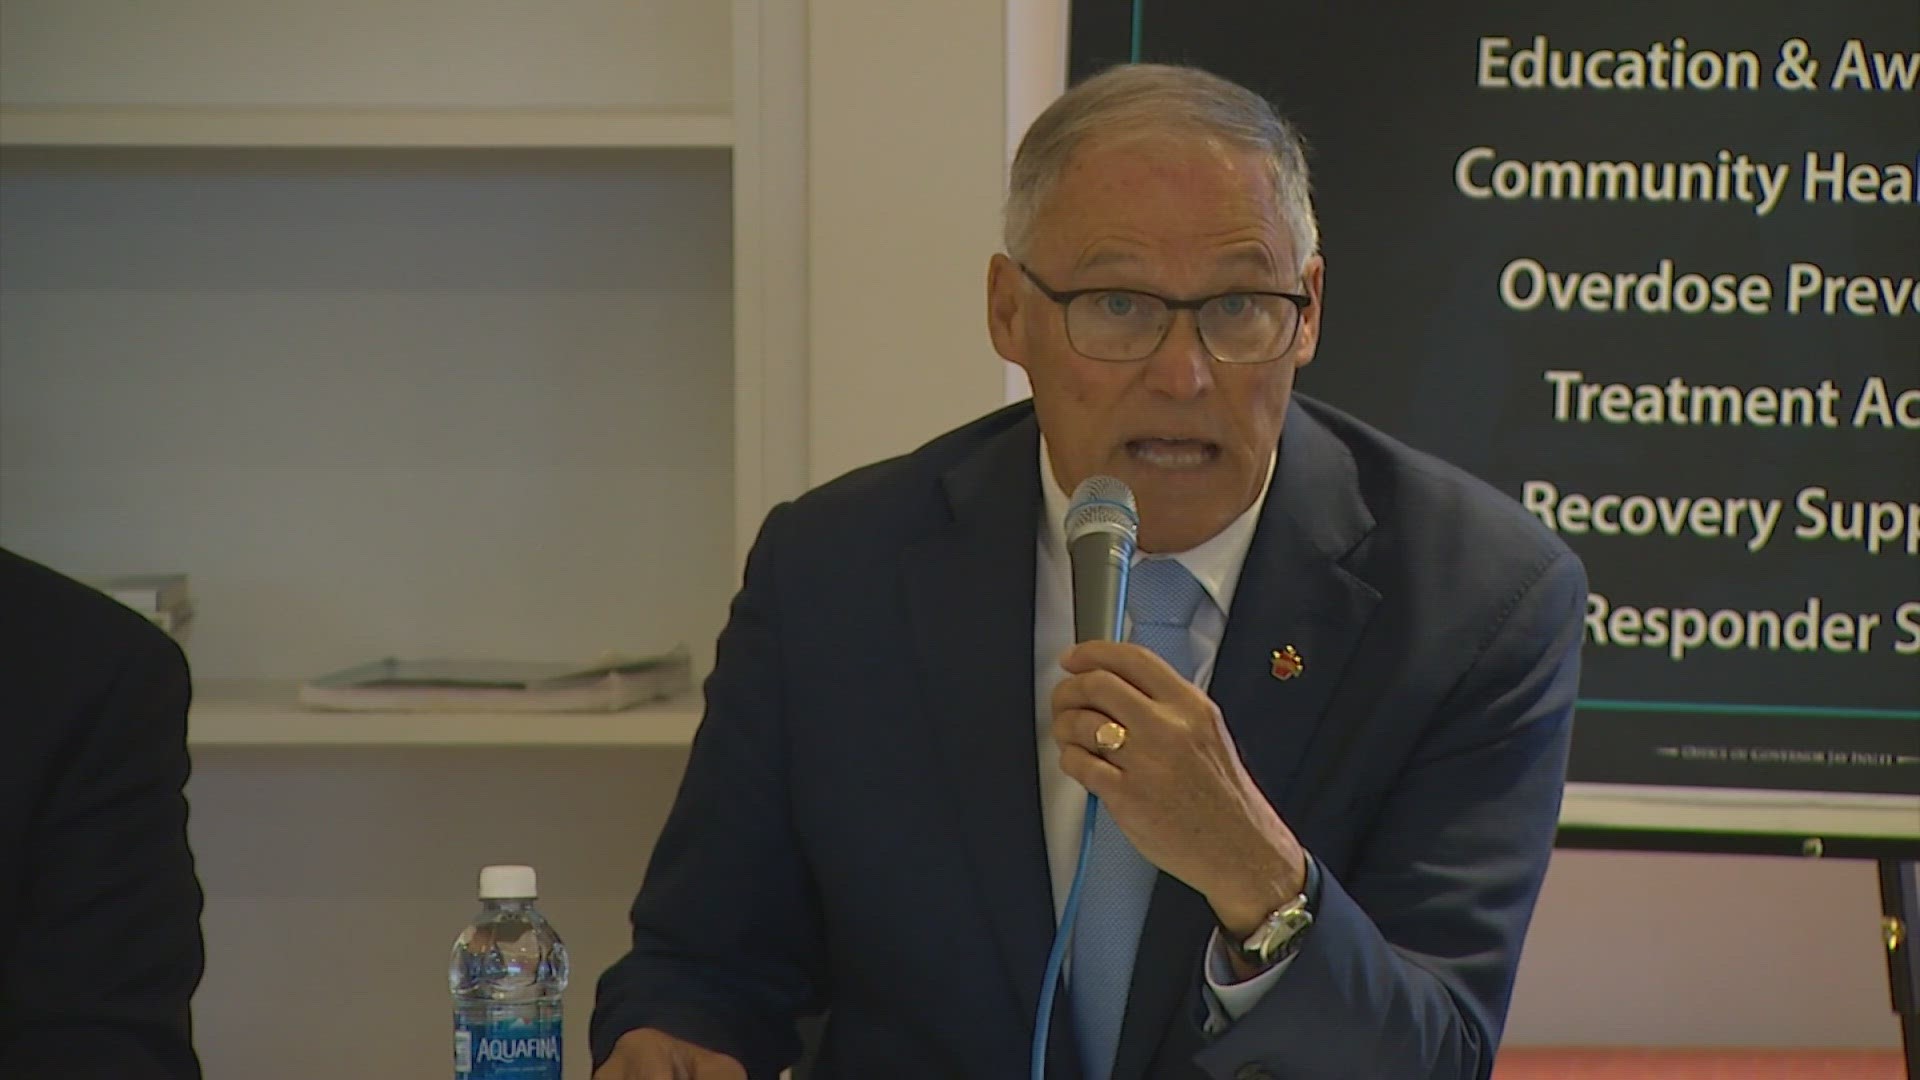 Gov. Jay Inslee said fentanyl is the nuclear weapon of opioids. He's now taking action to try and fight overdoses in our state.